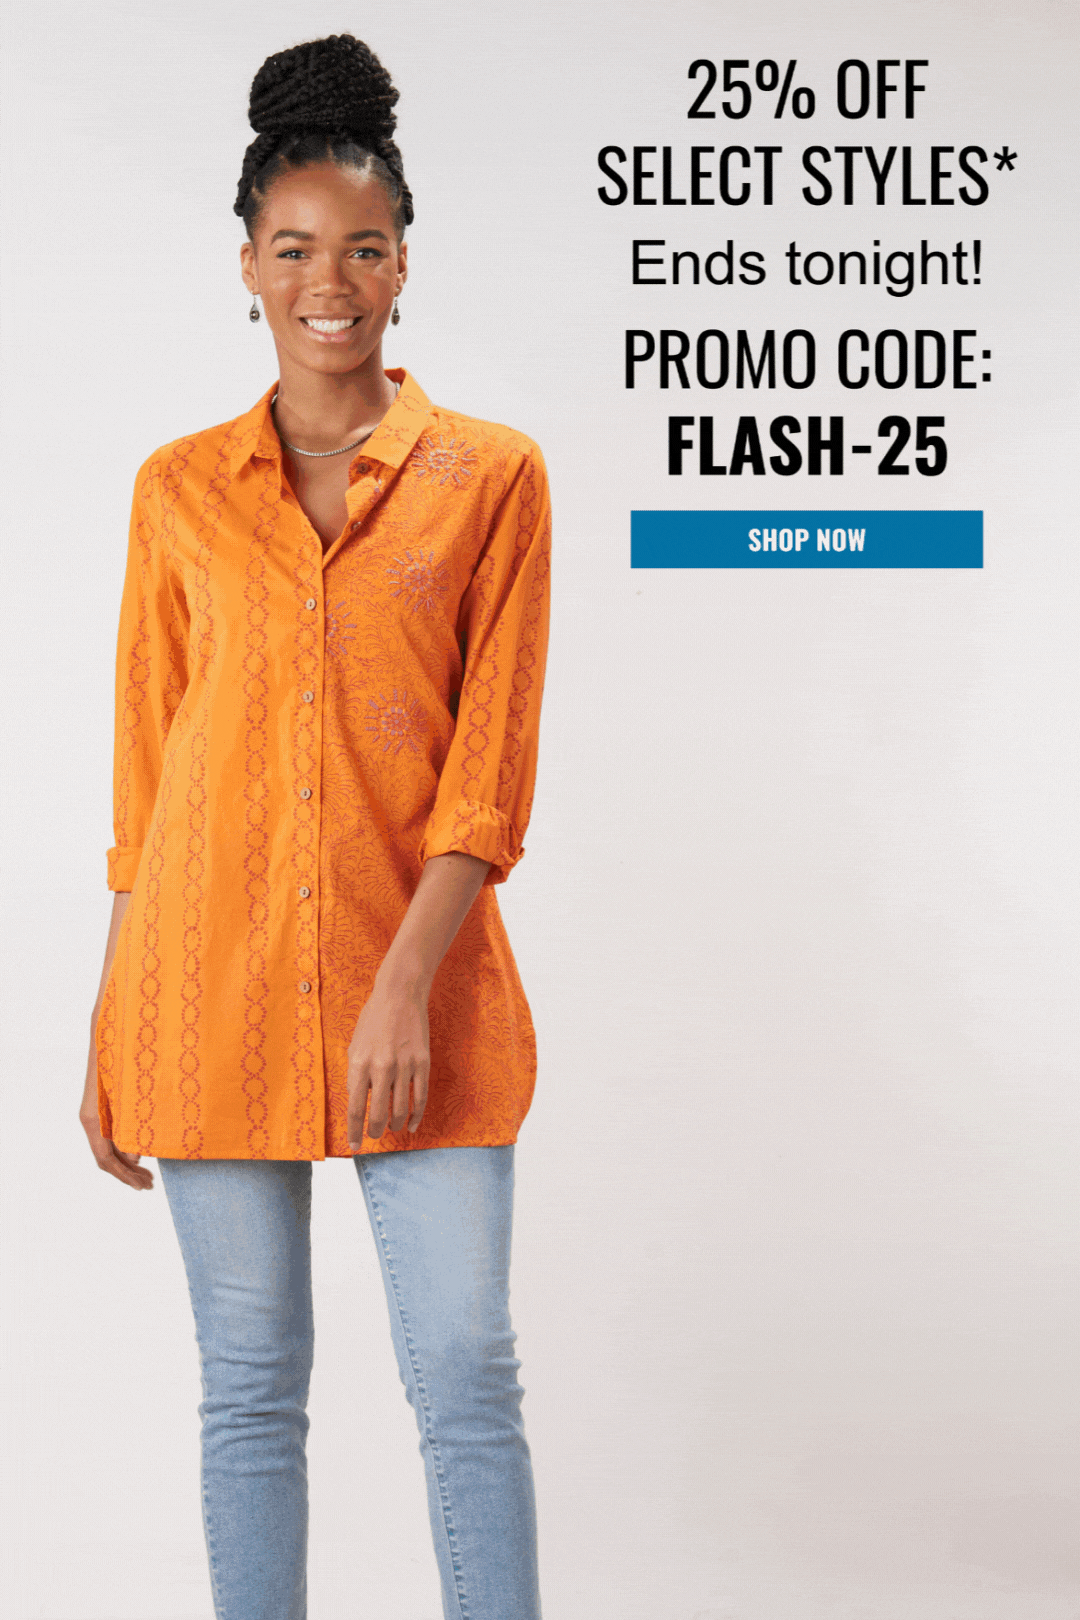 25% OFF SELECT STYLES* Ends tonight! PROMO CODE: FLASH-25 SHOP NOW